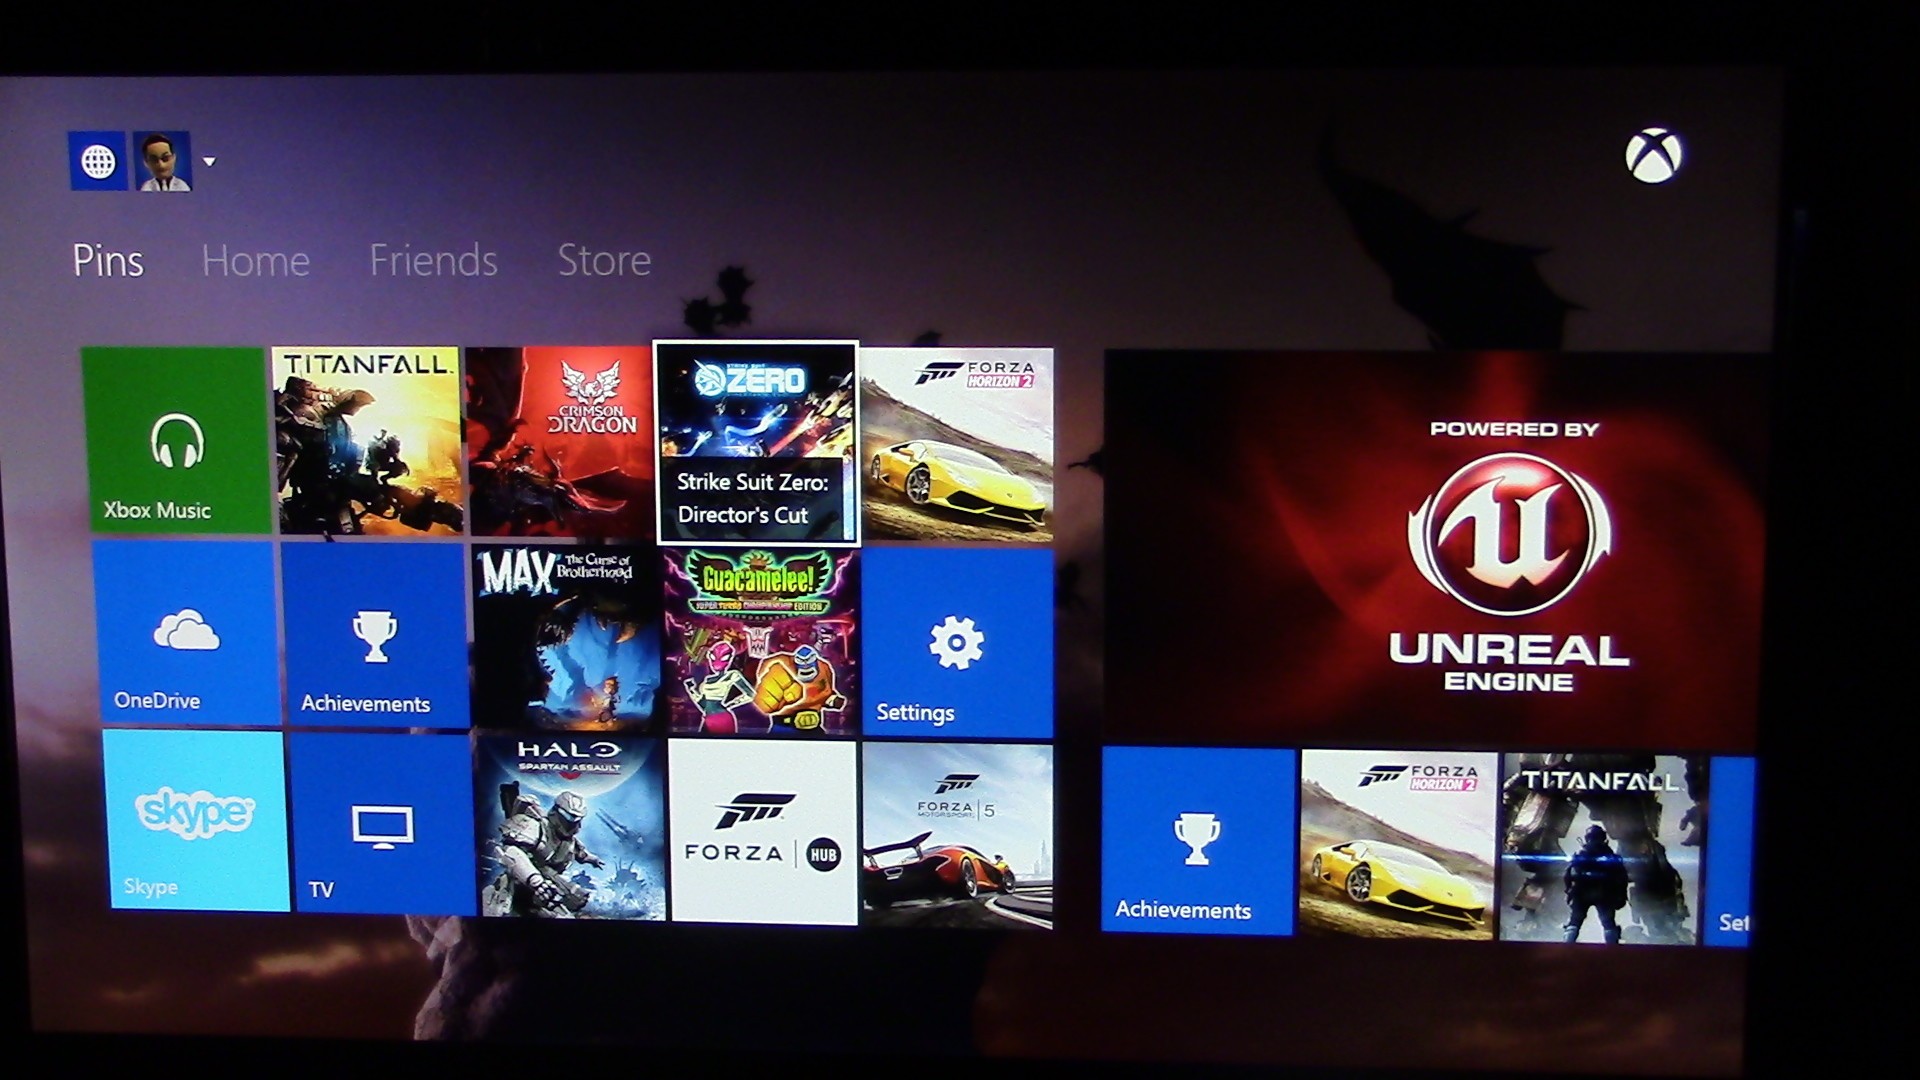 Xbox One November Update Custom Backgrounds Check Out How Spiffy Theyll Look on Your Dashboard